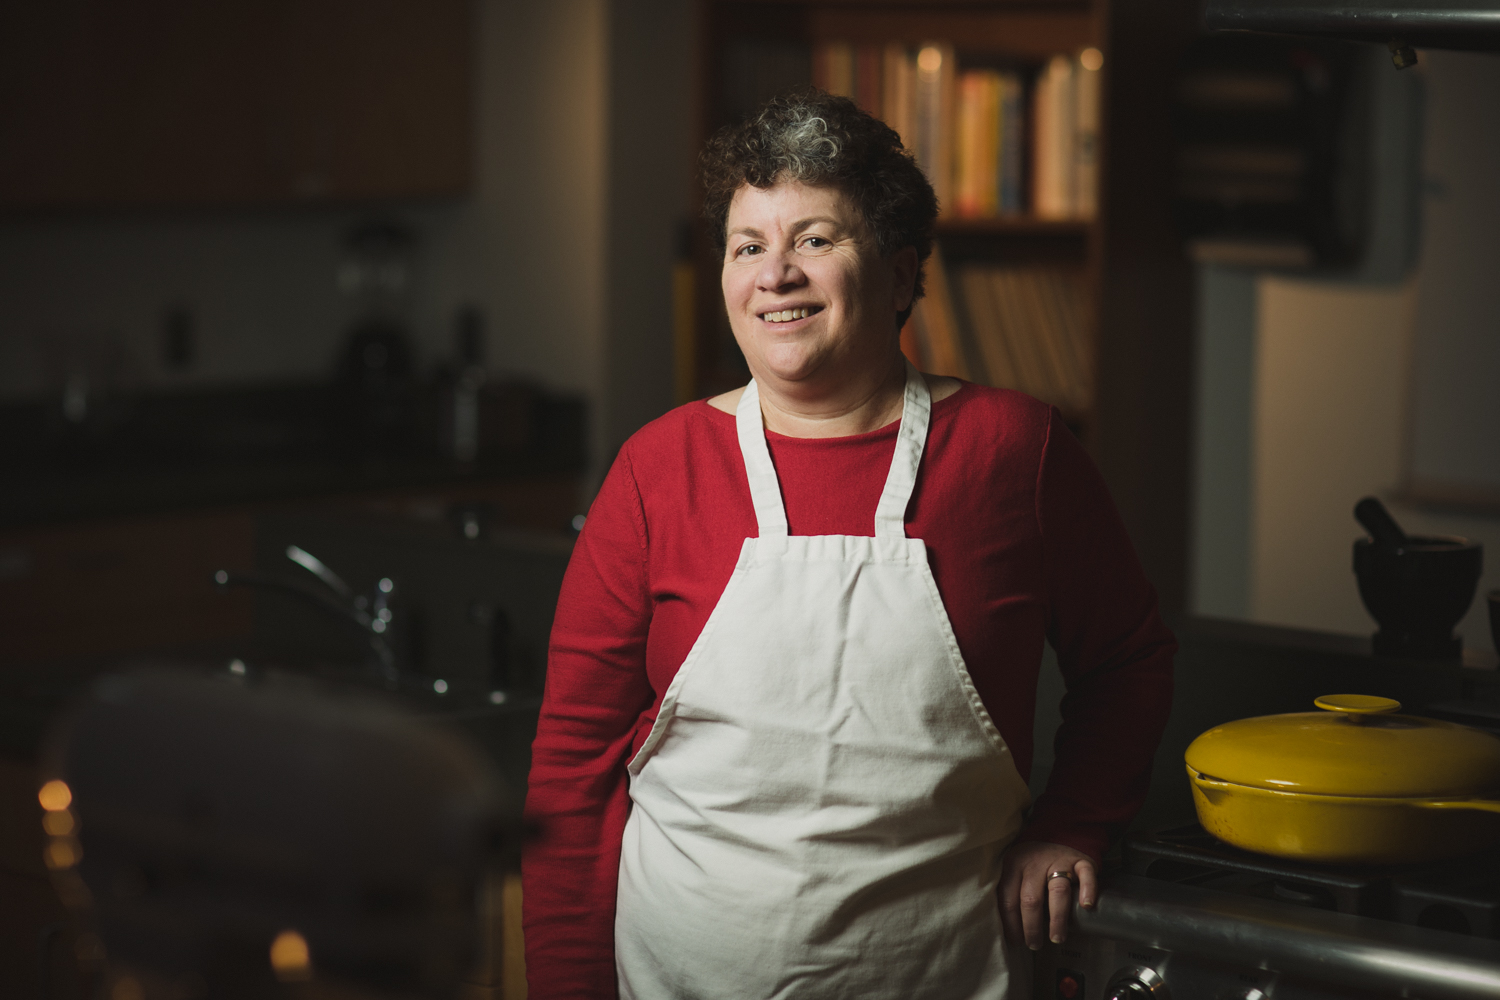 Amy Trubek was trained as a chef and anthropologist and is now an associate professor in the Department of Nutrition and Food Sciences at UVM